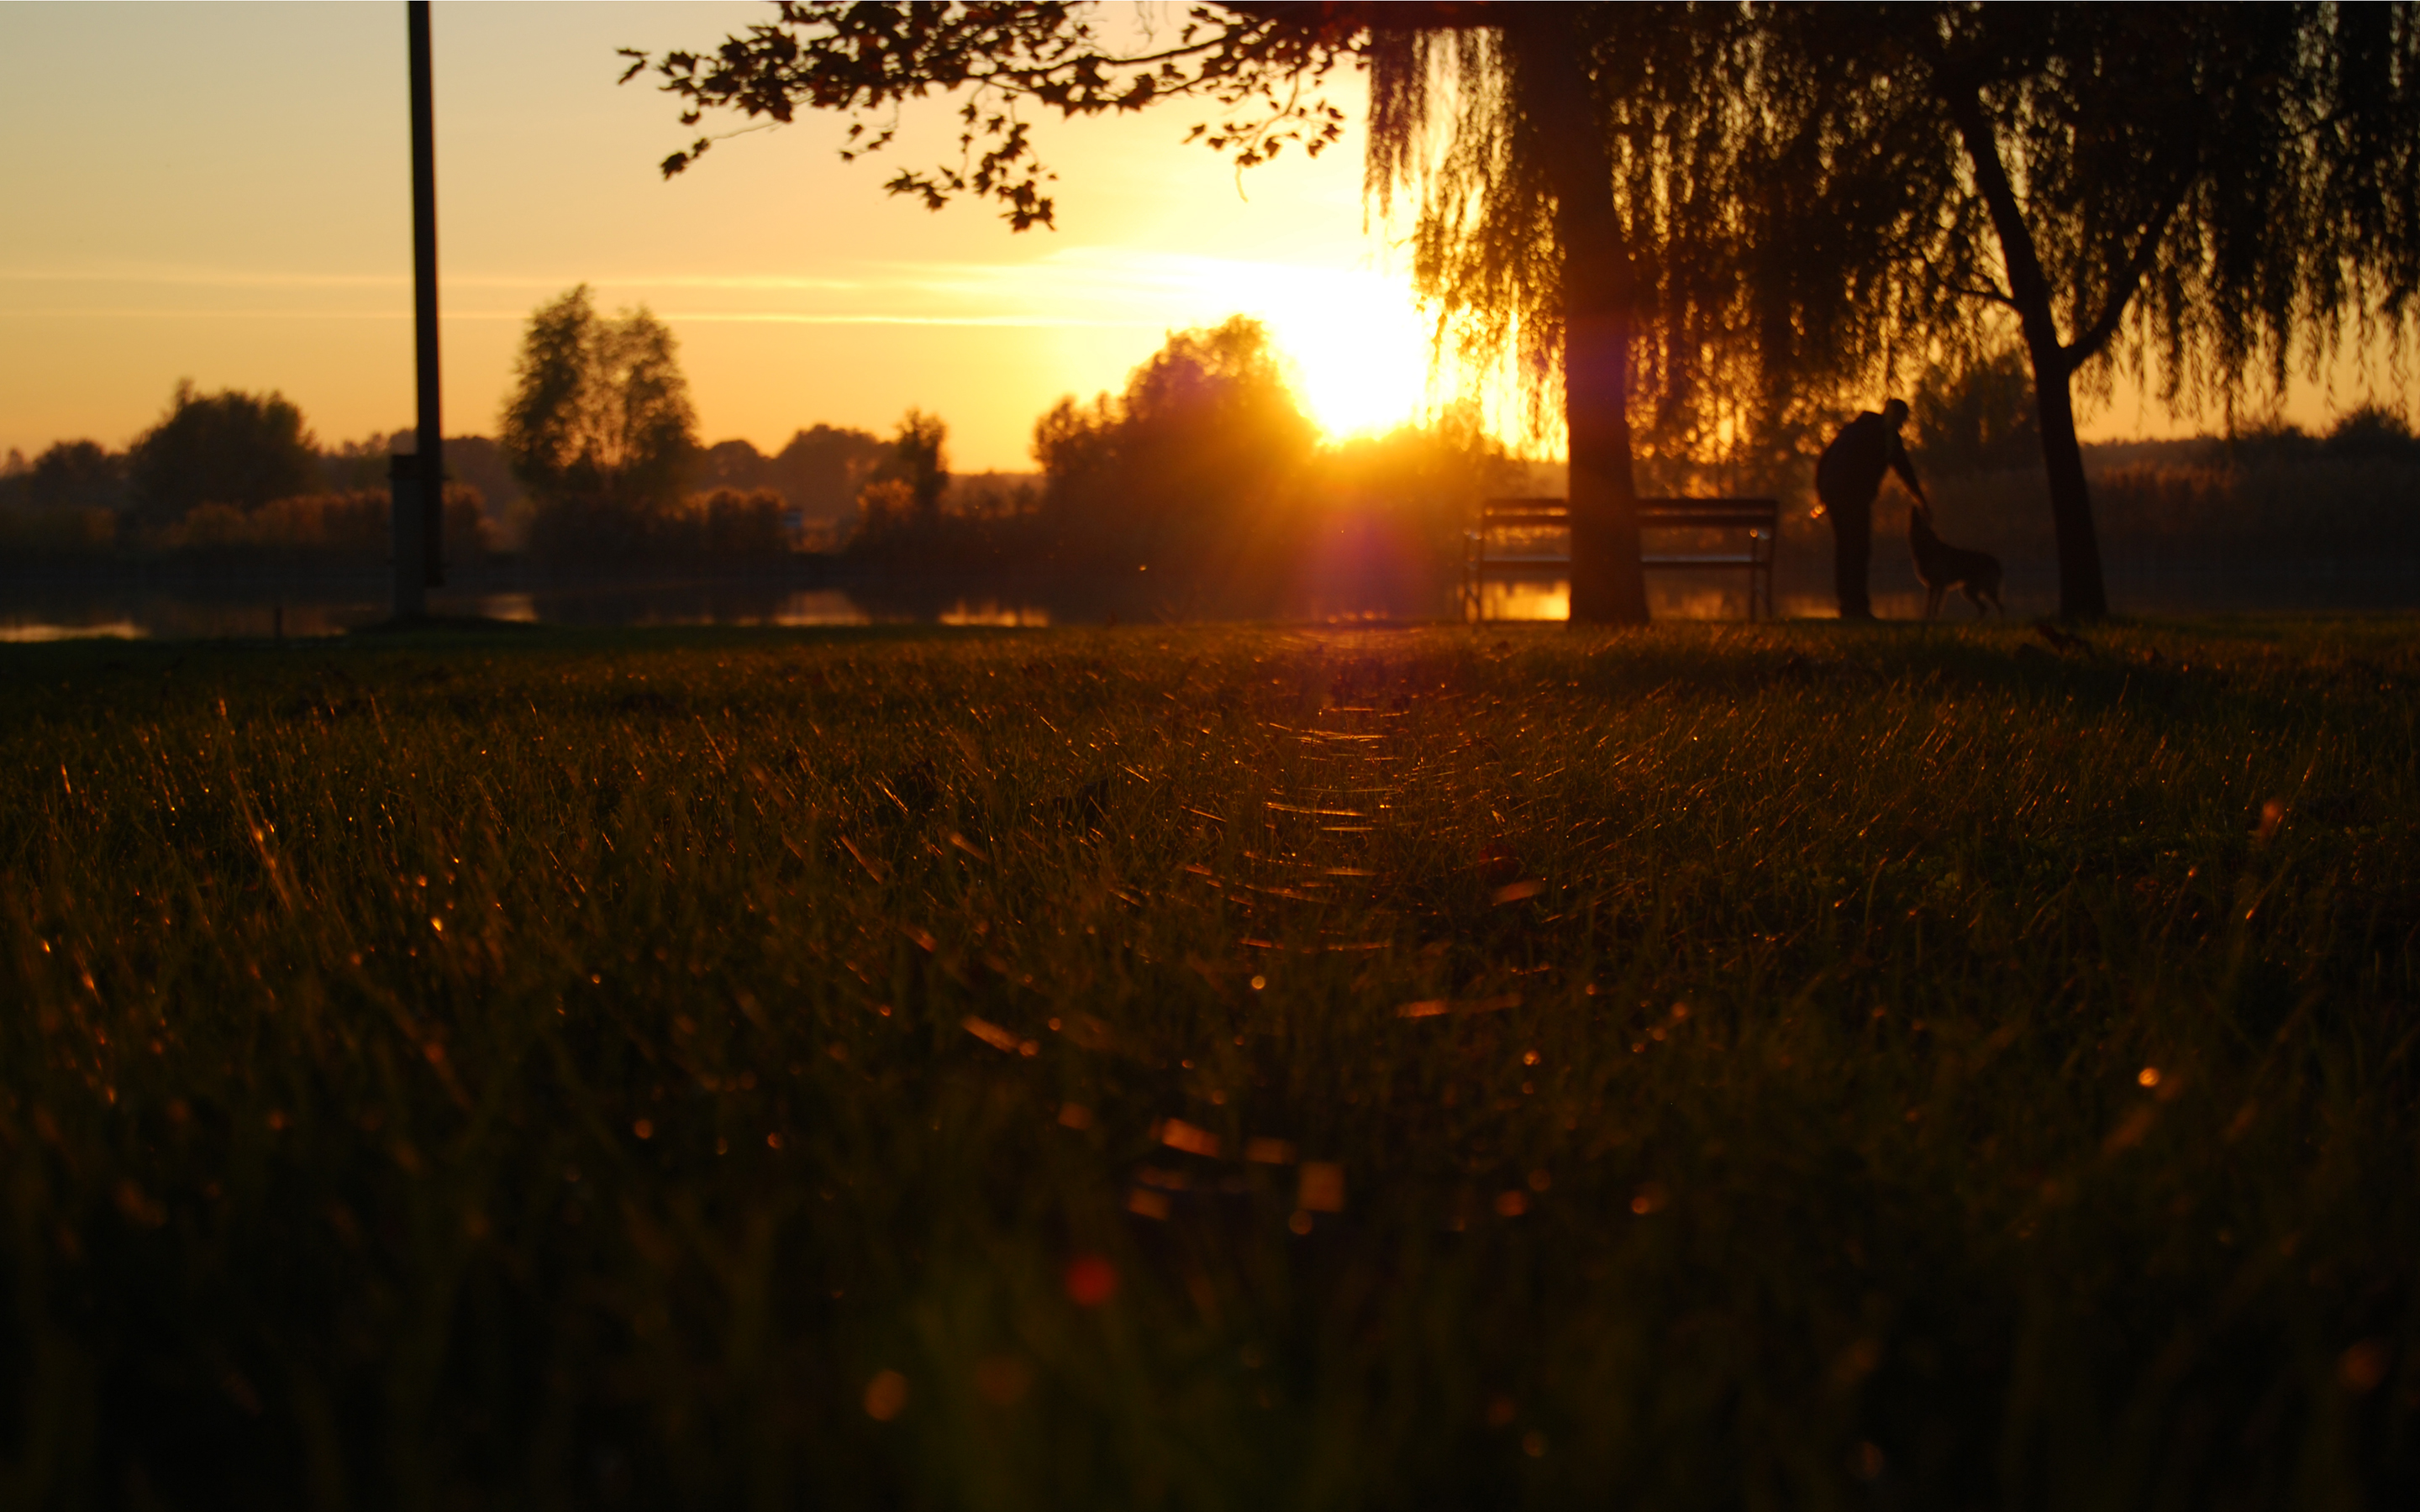 grass, Sunset, Sunlight, Tree, Person, People, Bench, Dogs Wallpaper